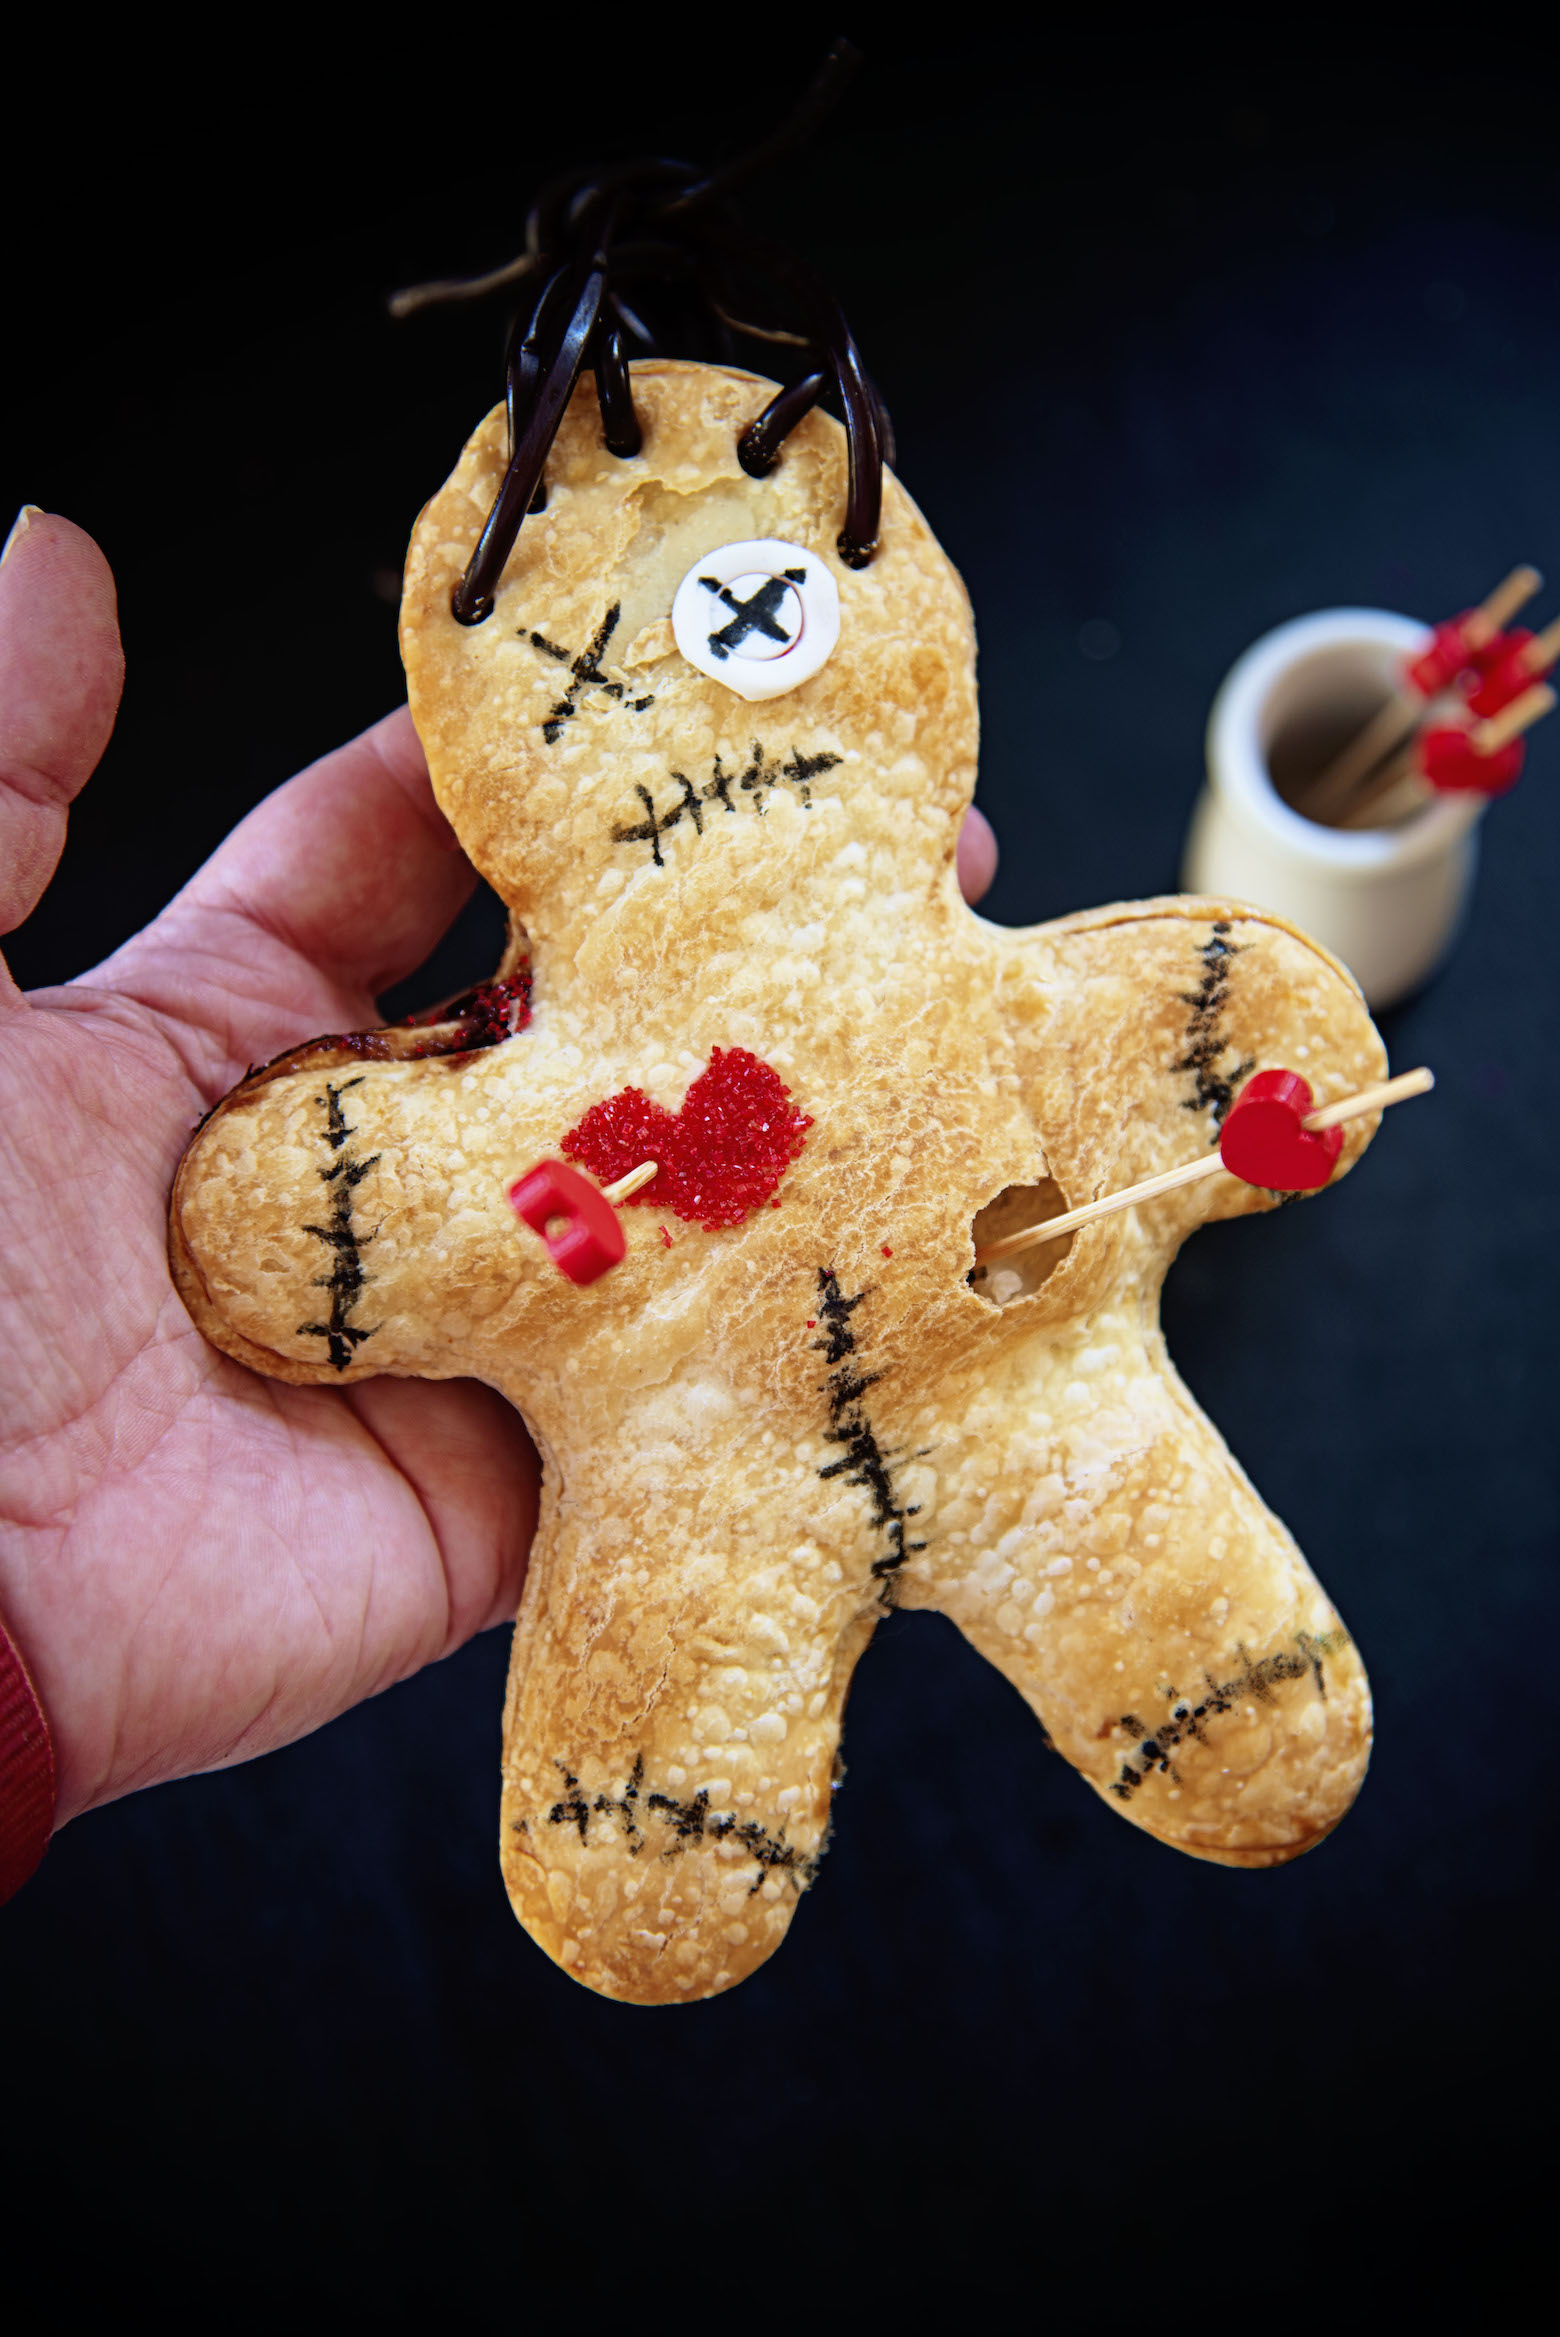 Voodoo Doll Hand Pies being held in a hand for up close shot.